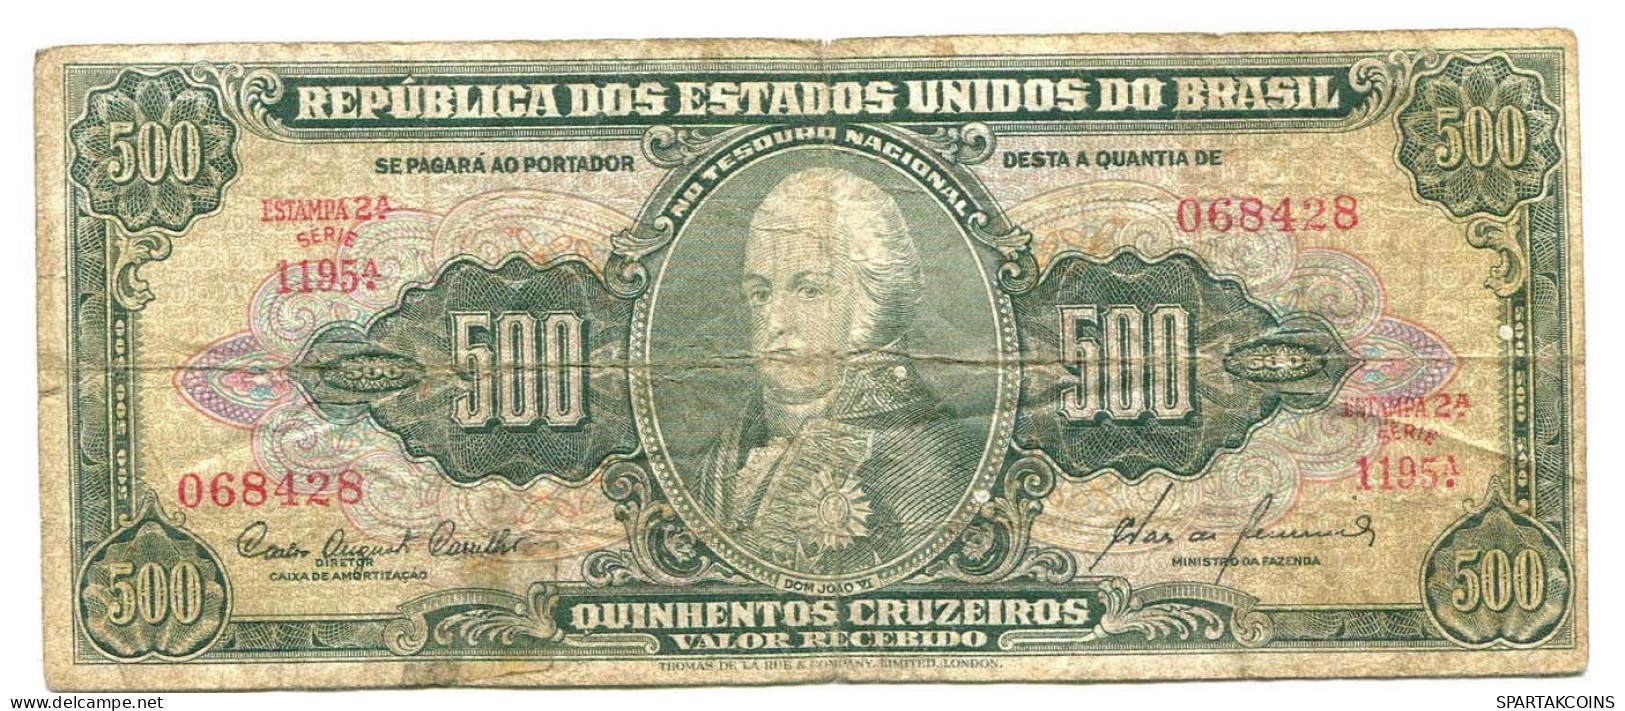 BRASIL 500 CRUZEIROS 1960 SERIE 2259A Paper Money Banknote #P10862.4 - [11] Local Banknote Issues